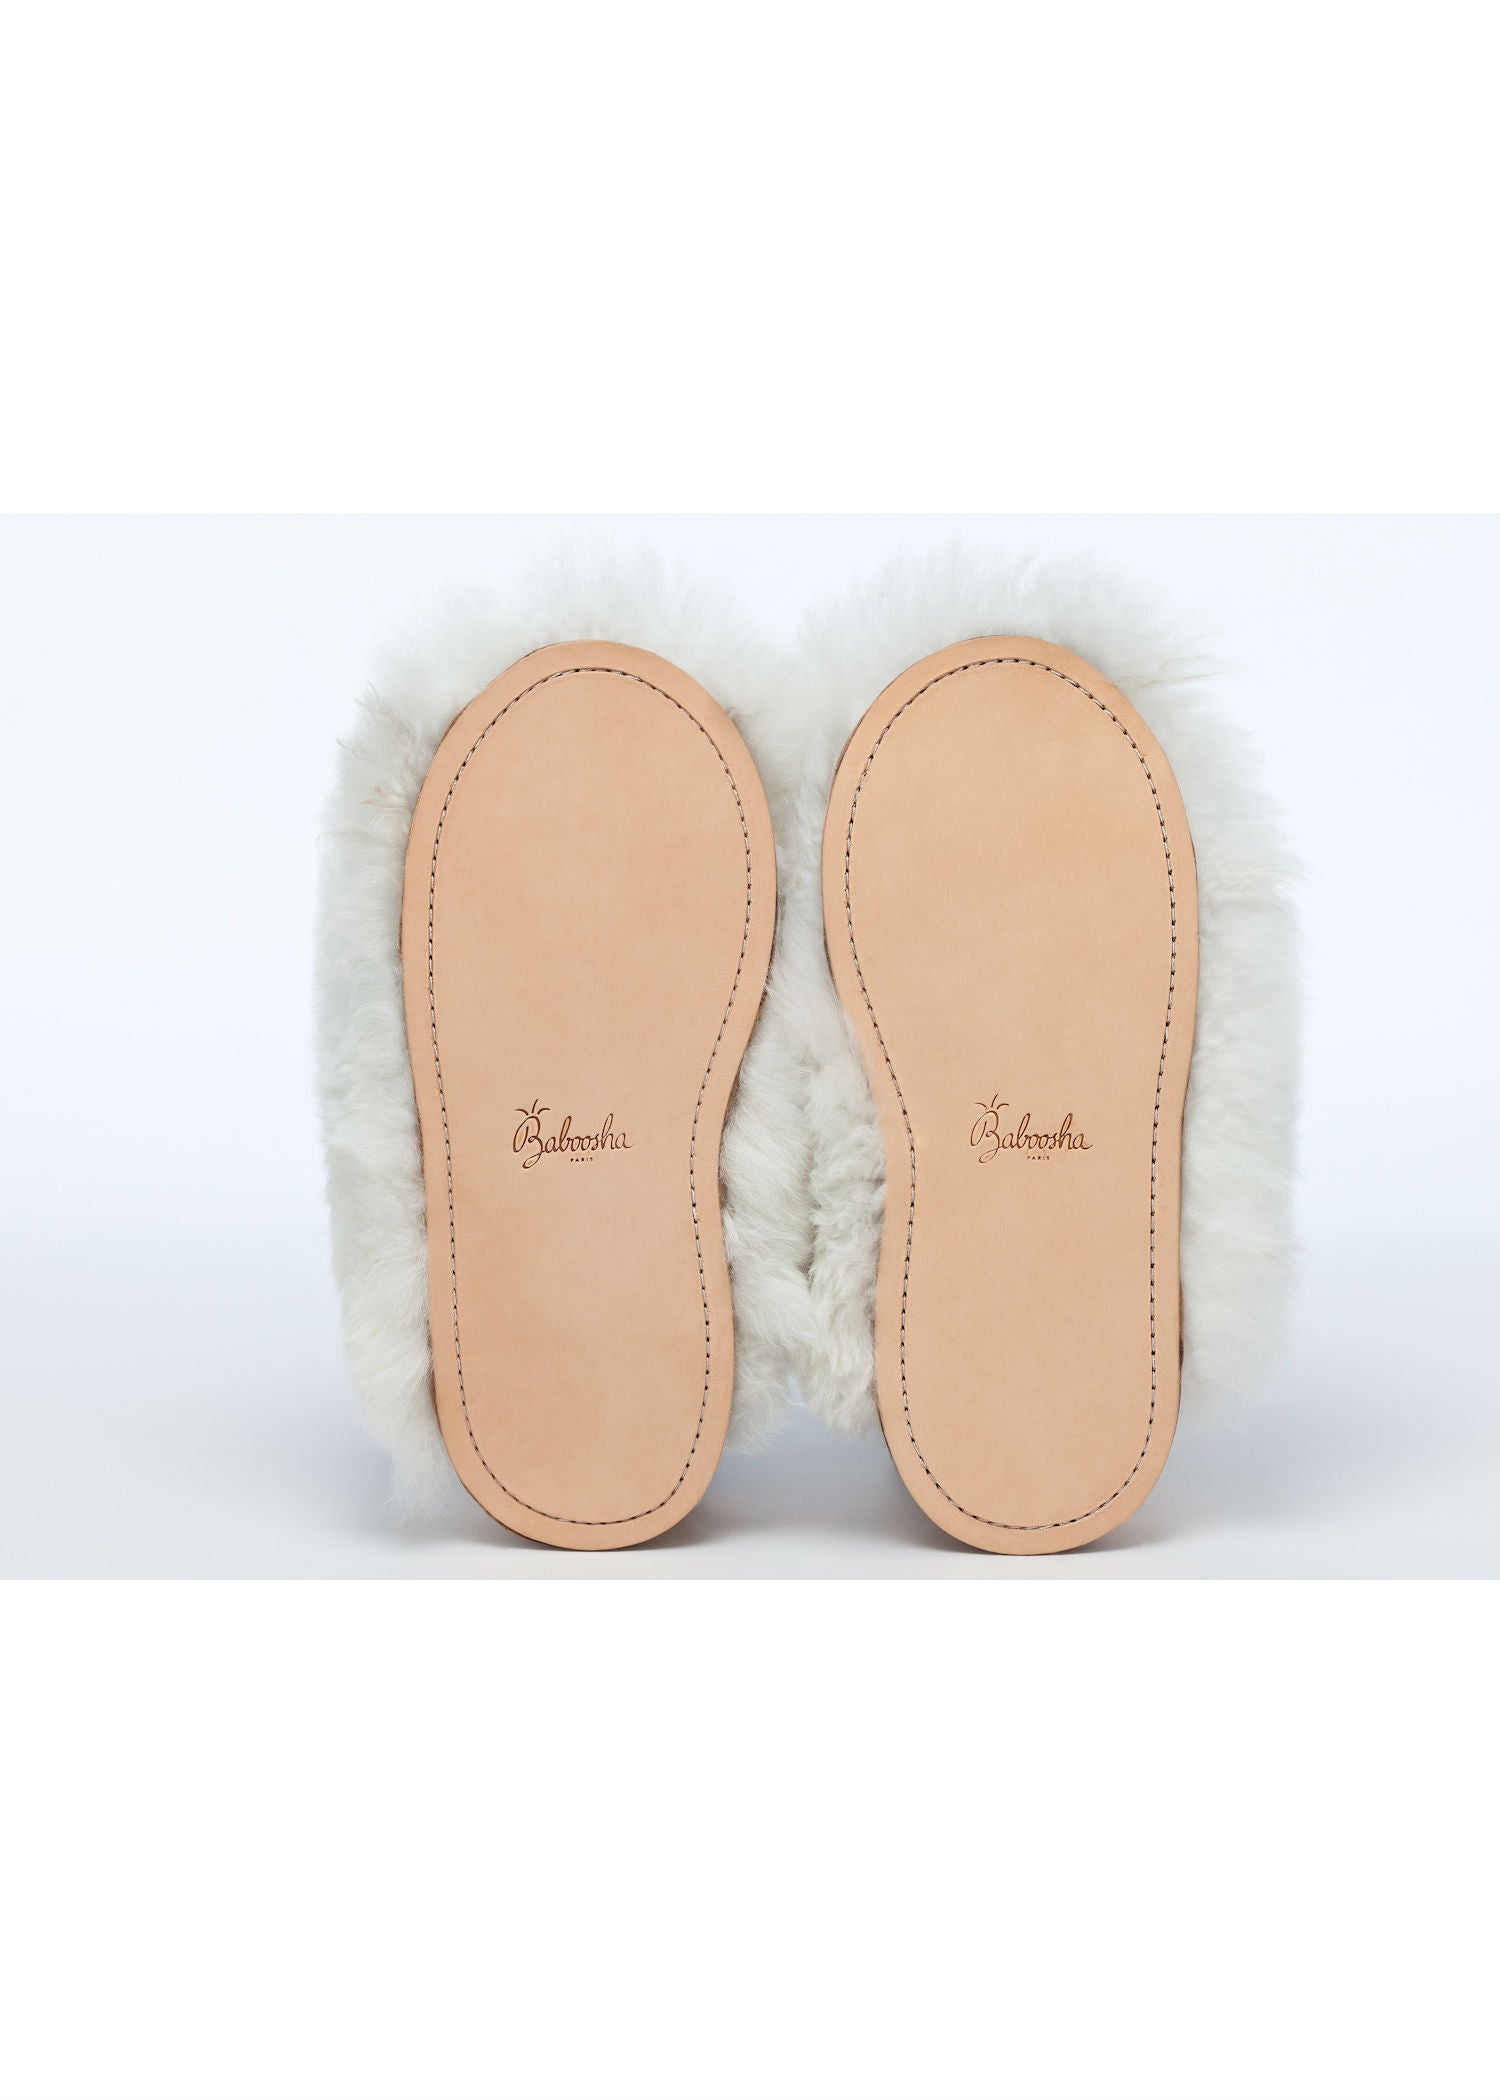 express slippers